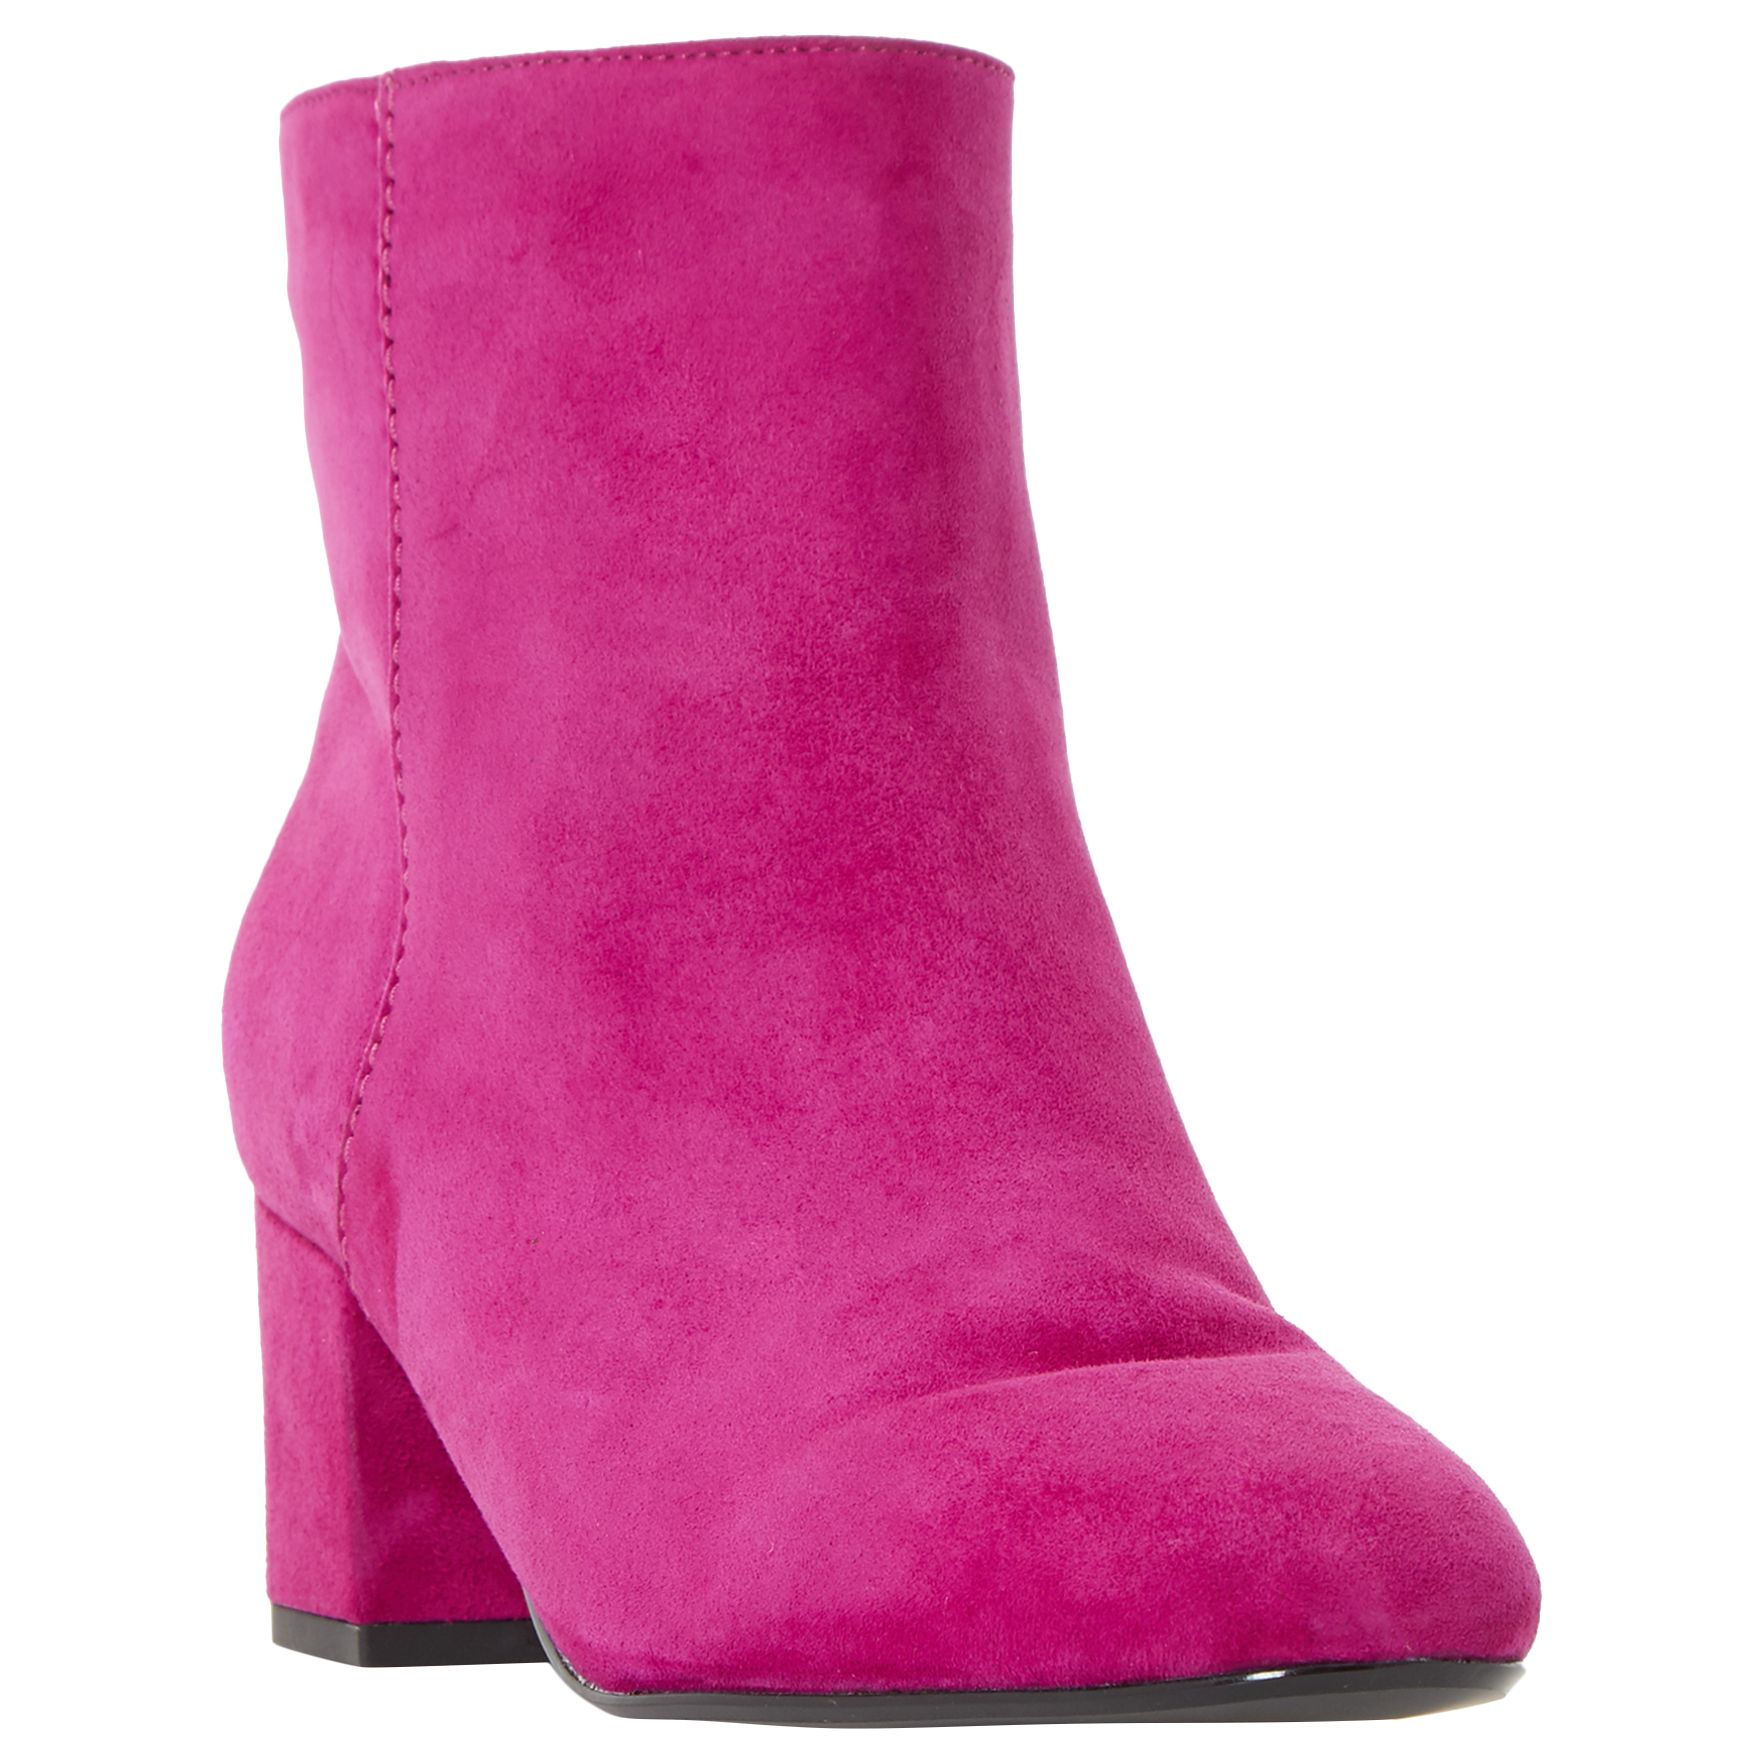 Dune Olyvea Block Heeled Ankle Boots, Pink Suede at John Lewis & Partners